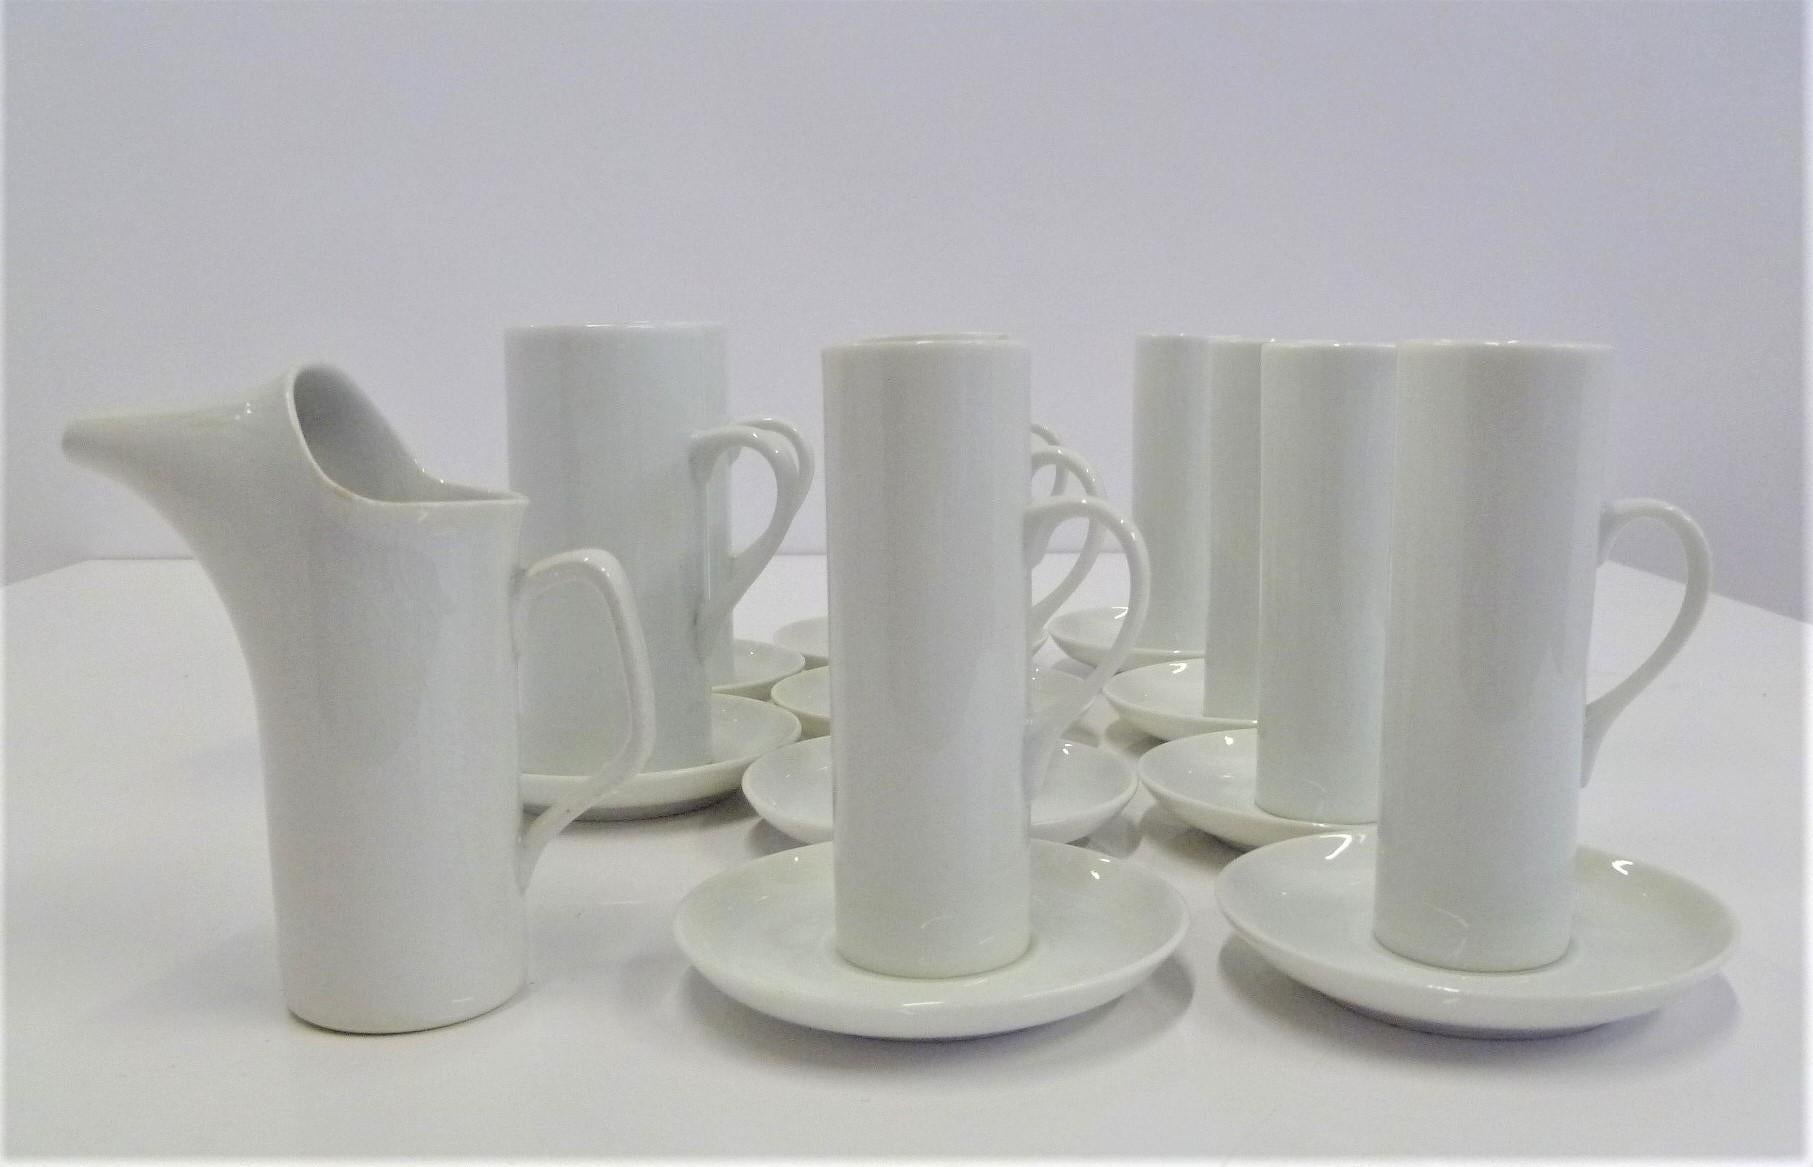 Mid-Century Modern set of white porcelain coffee set, a large grouping of 21 pieces. Consisting of 8 demitasse cups and saucers, 2 Irish coffee cups and saucers and one small creamer by Schmid International designed by LaGardo Tackett. Some pieces